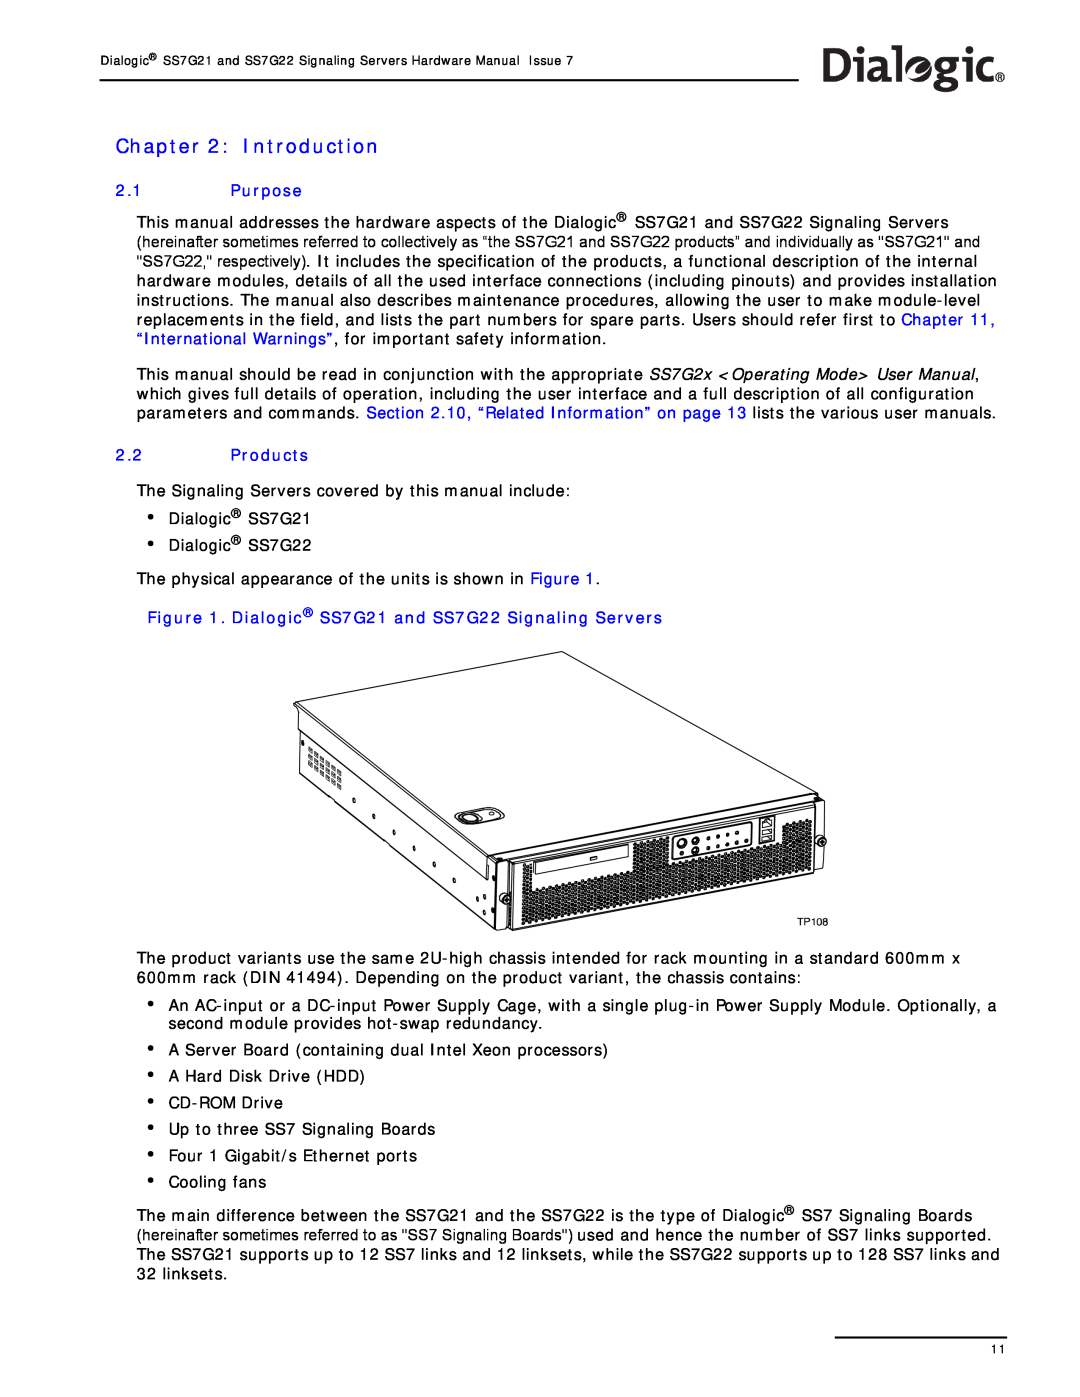 Dialogic manual Introduction, Purpose, Products, Dialogic SS7G21 and SS7G22 Signaling Servers 